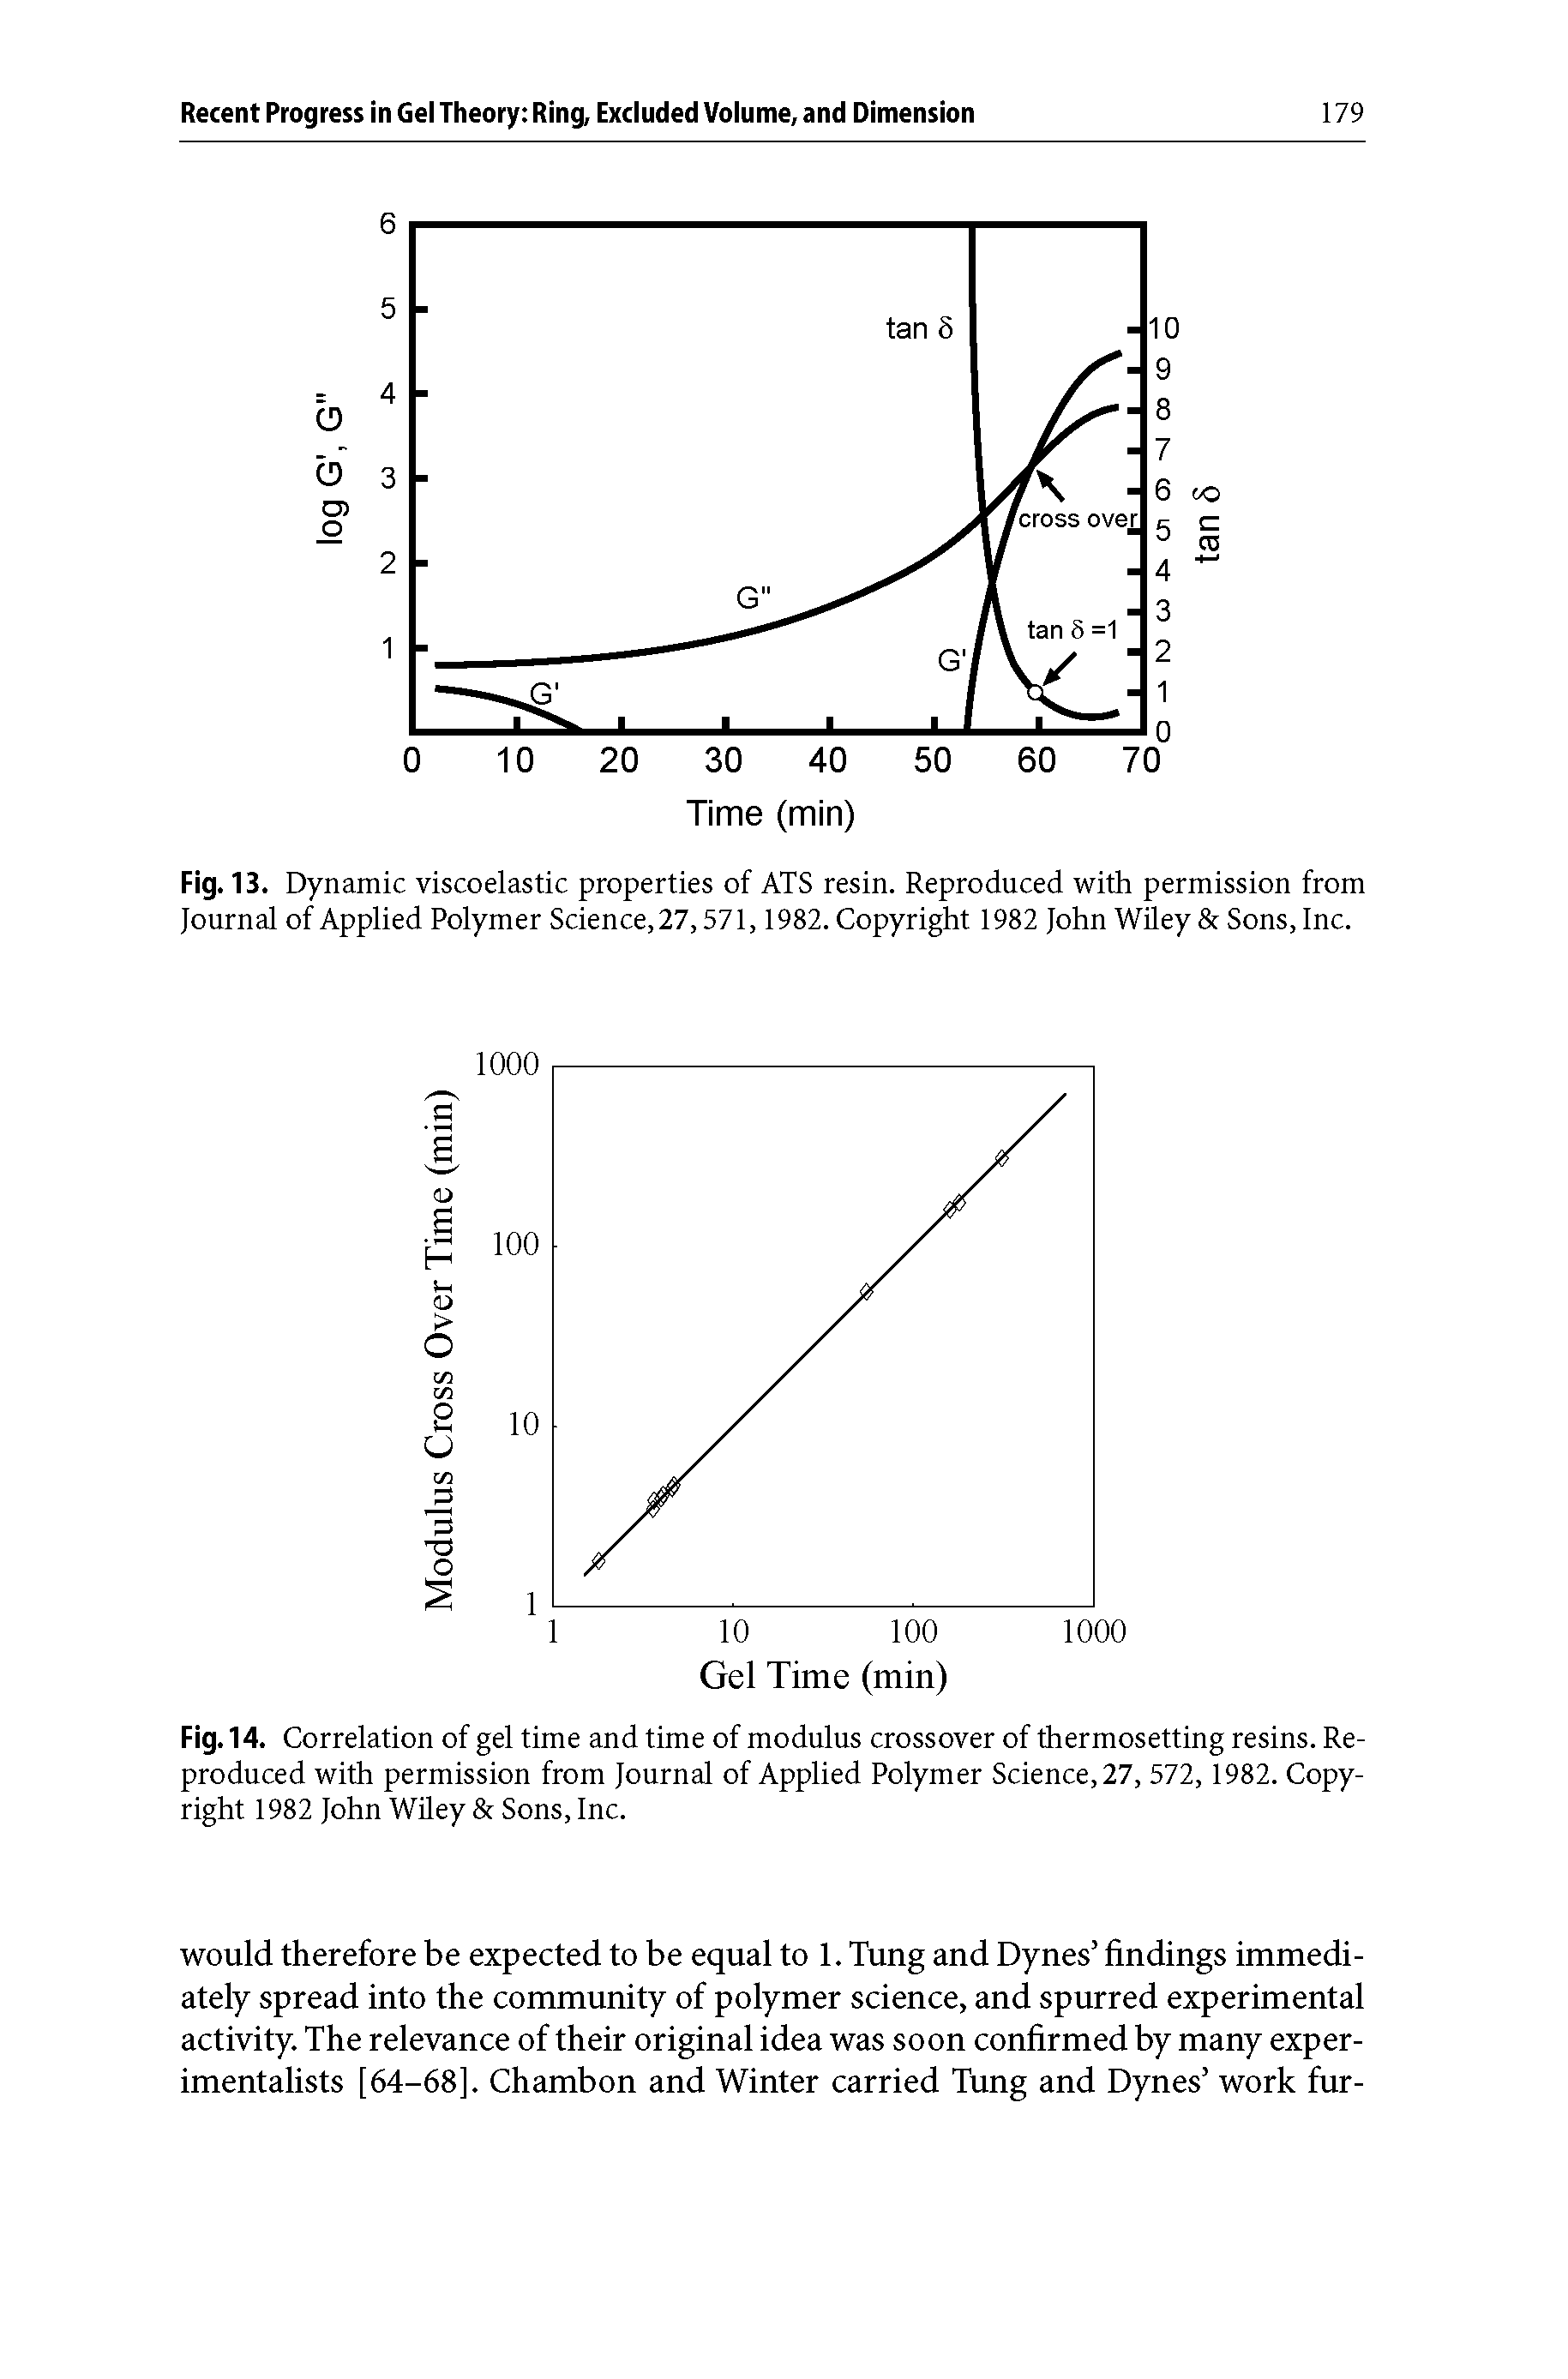 Fig. 14. Correlation of gel time and time of modulus crossover of thermosetting resins. Reproduced with permission from Journal of Applied Polymer Science, 27, 572,1982. Copyright 1982 John Wiley Sons, Inc.